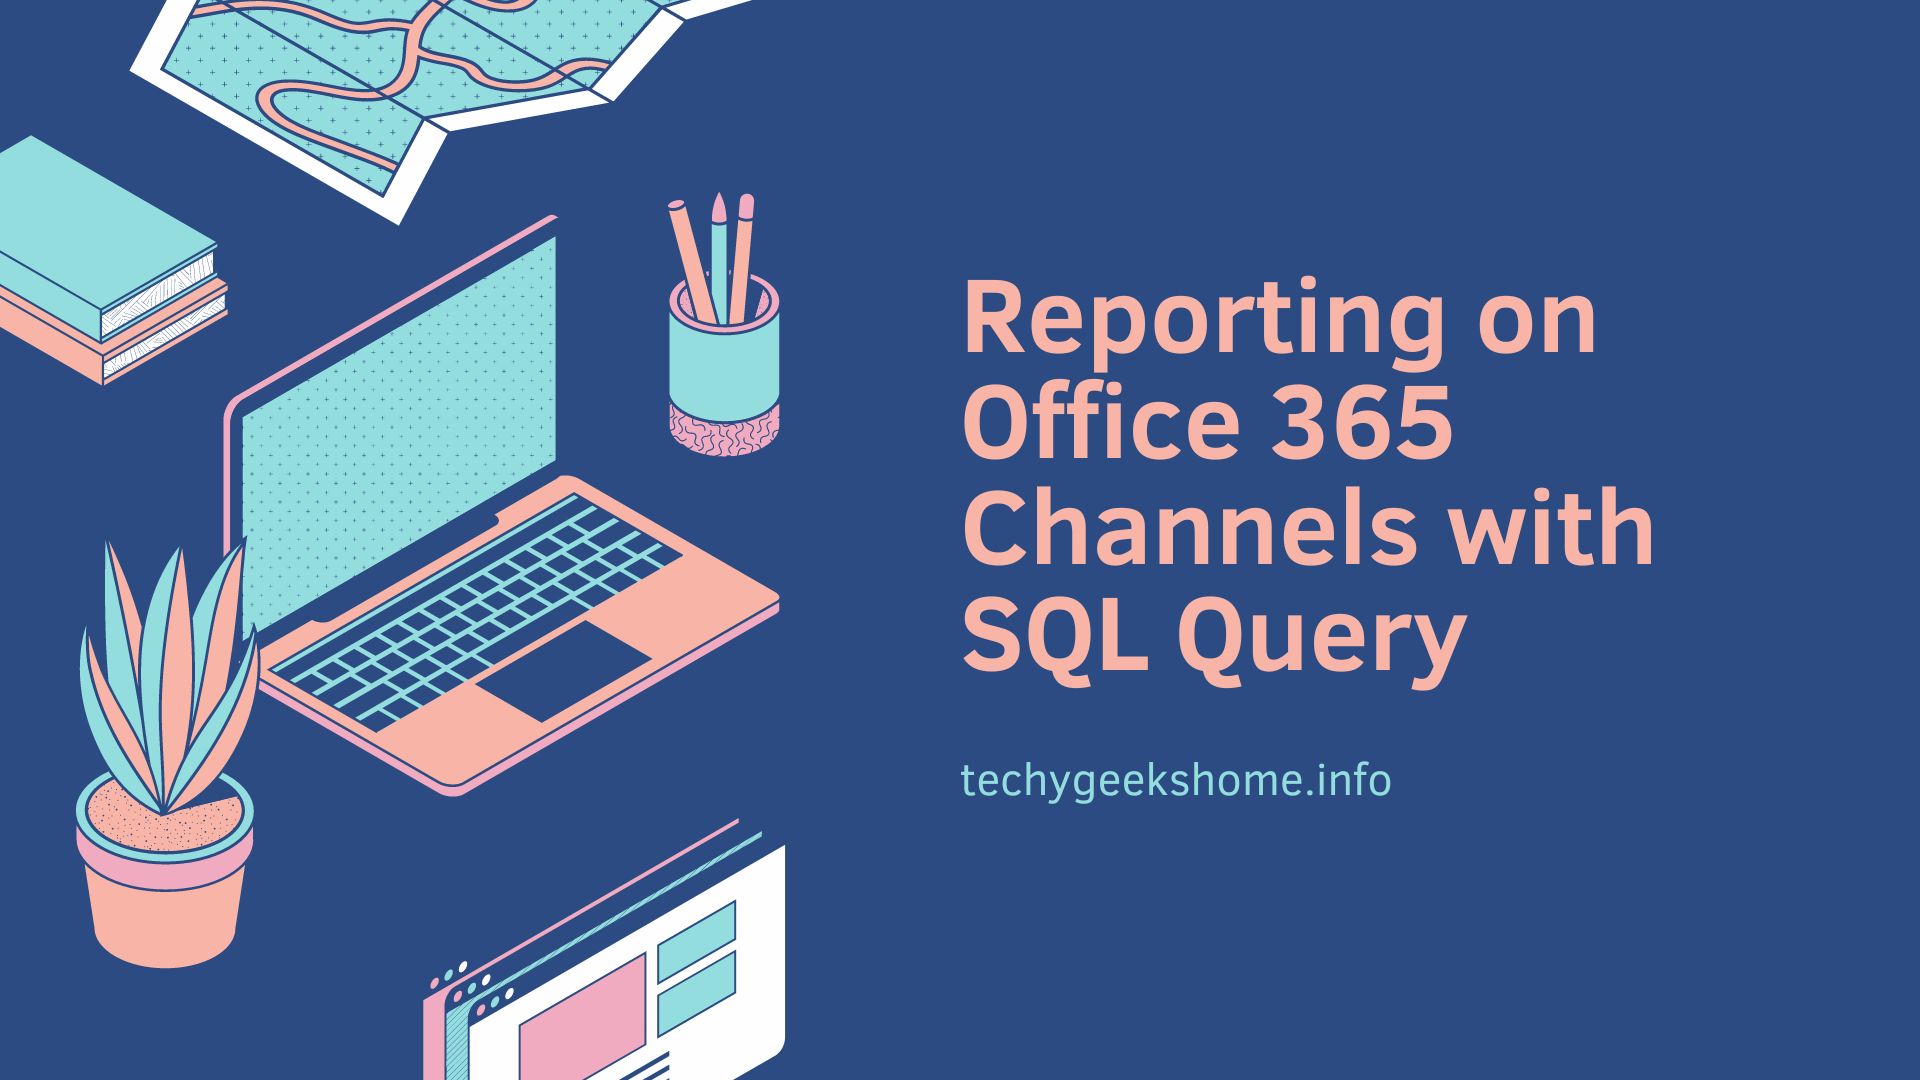 Reporting on Office 365 Channels with SQL Query